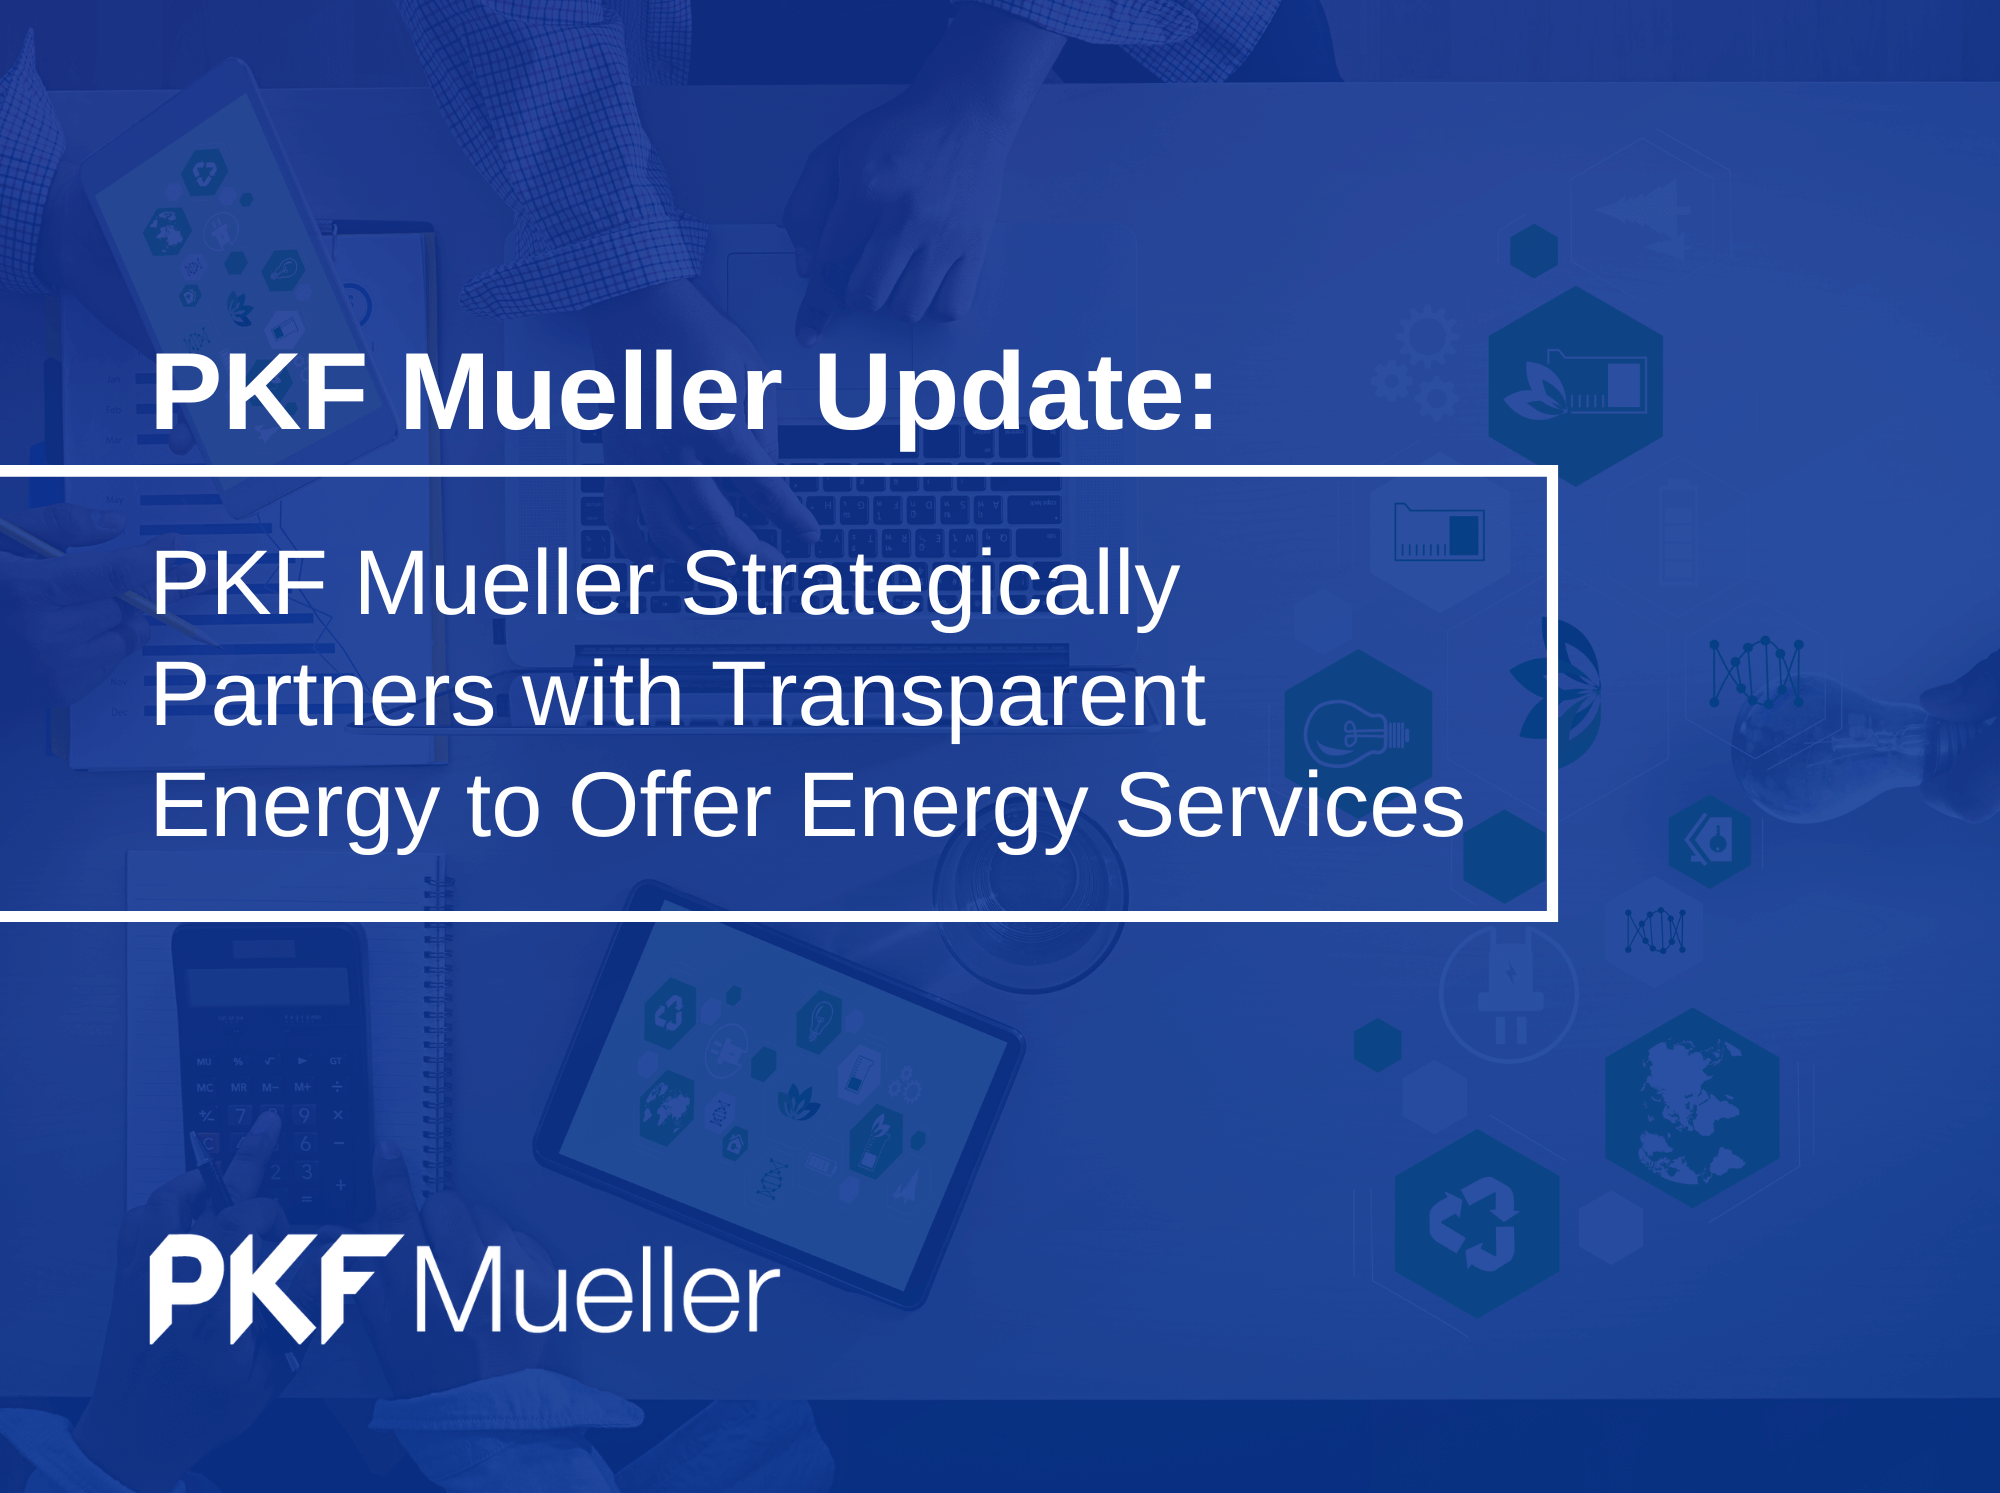 PKF Mueller Strategically Partners with Transparent Energy to Offer Energy Services